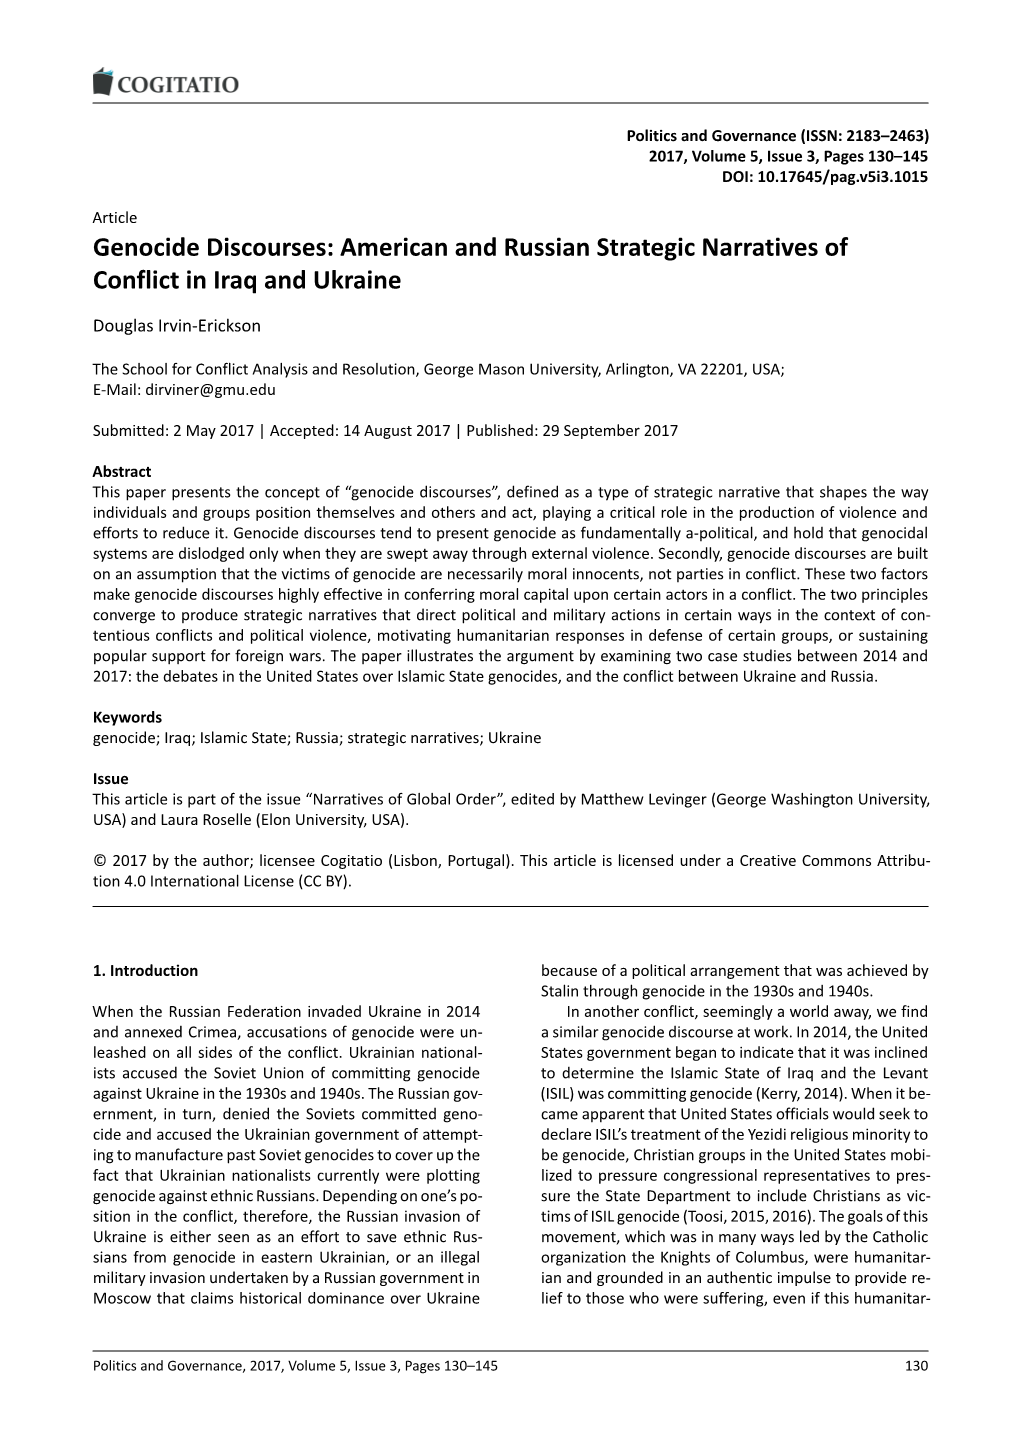 Genocide Discourses: American and Russian Strategic Narratives of Conflict in Iraq and Ukraine